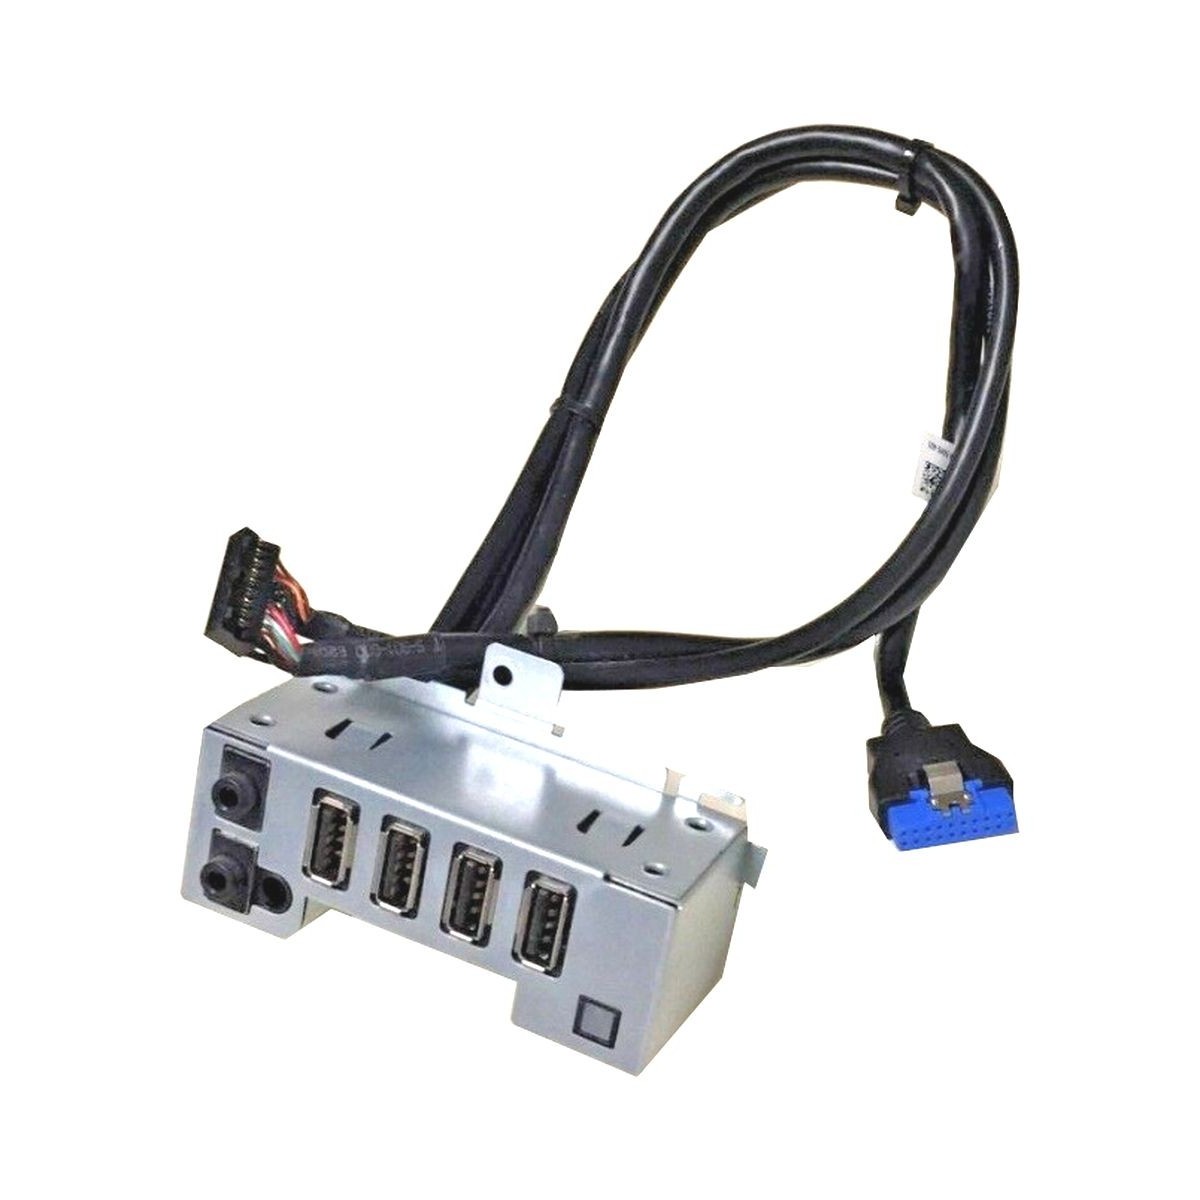 FRONT PANEL USB DELL PRECISION T1650 04NYMD